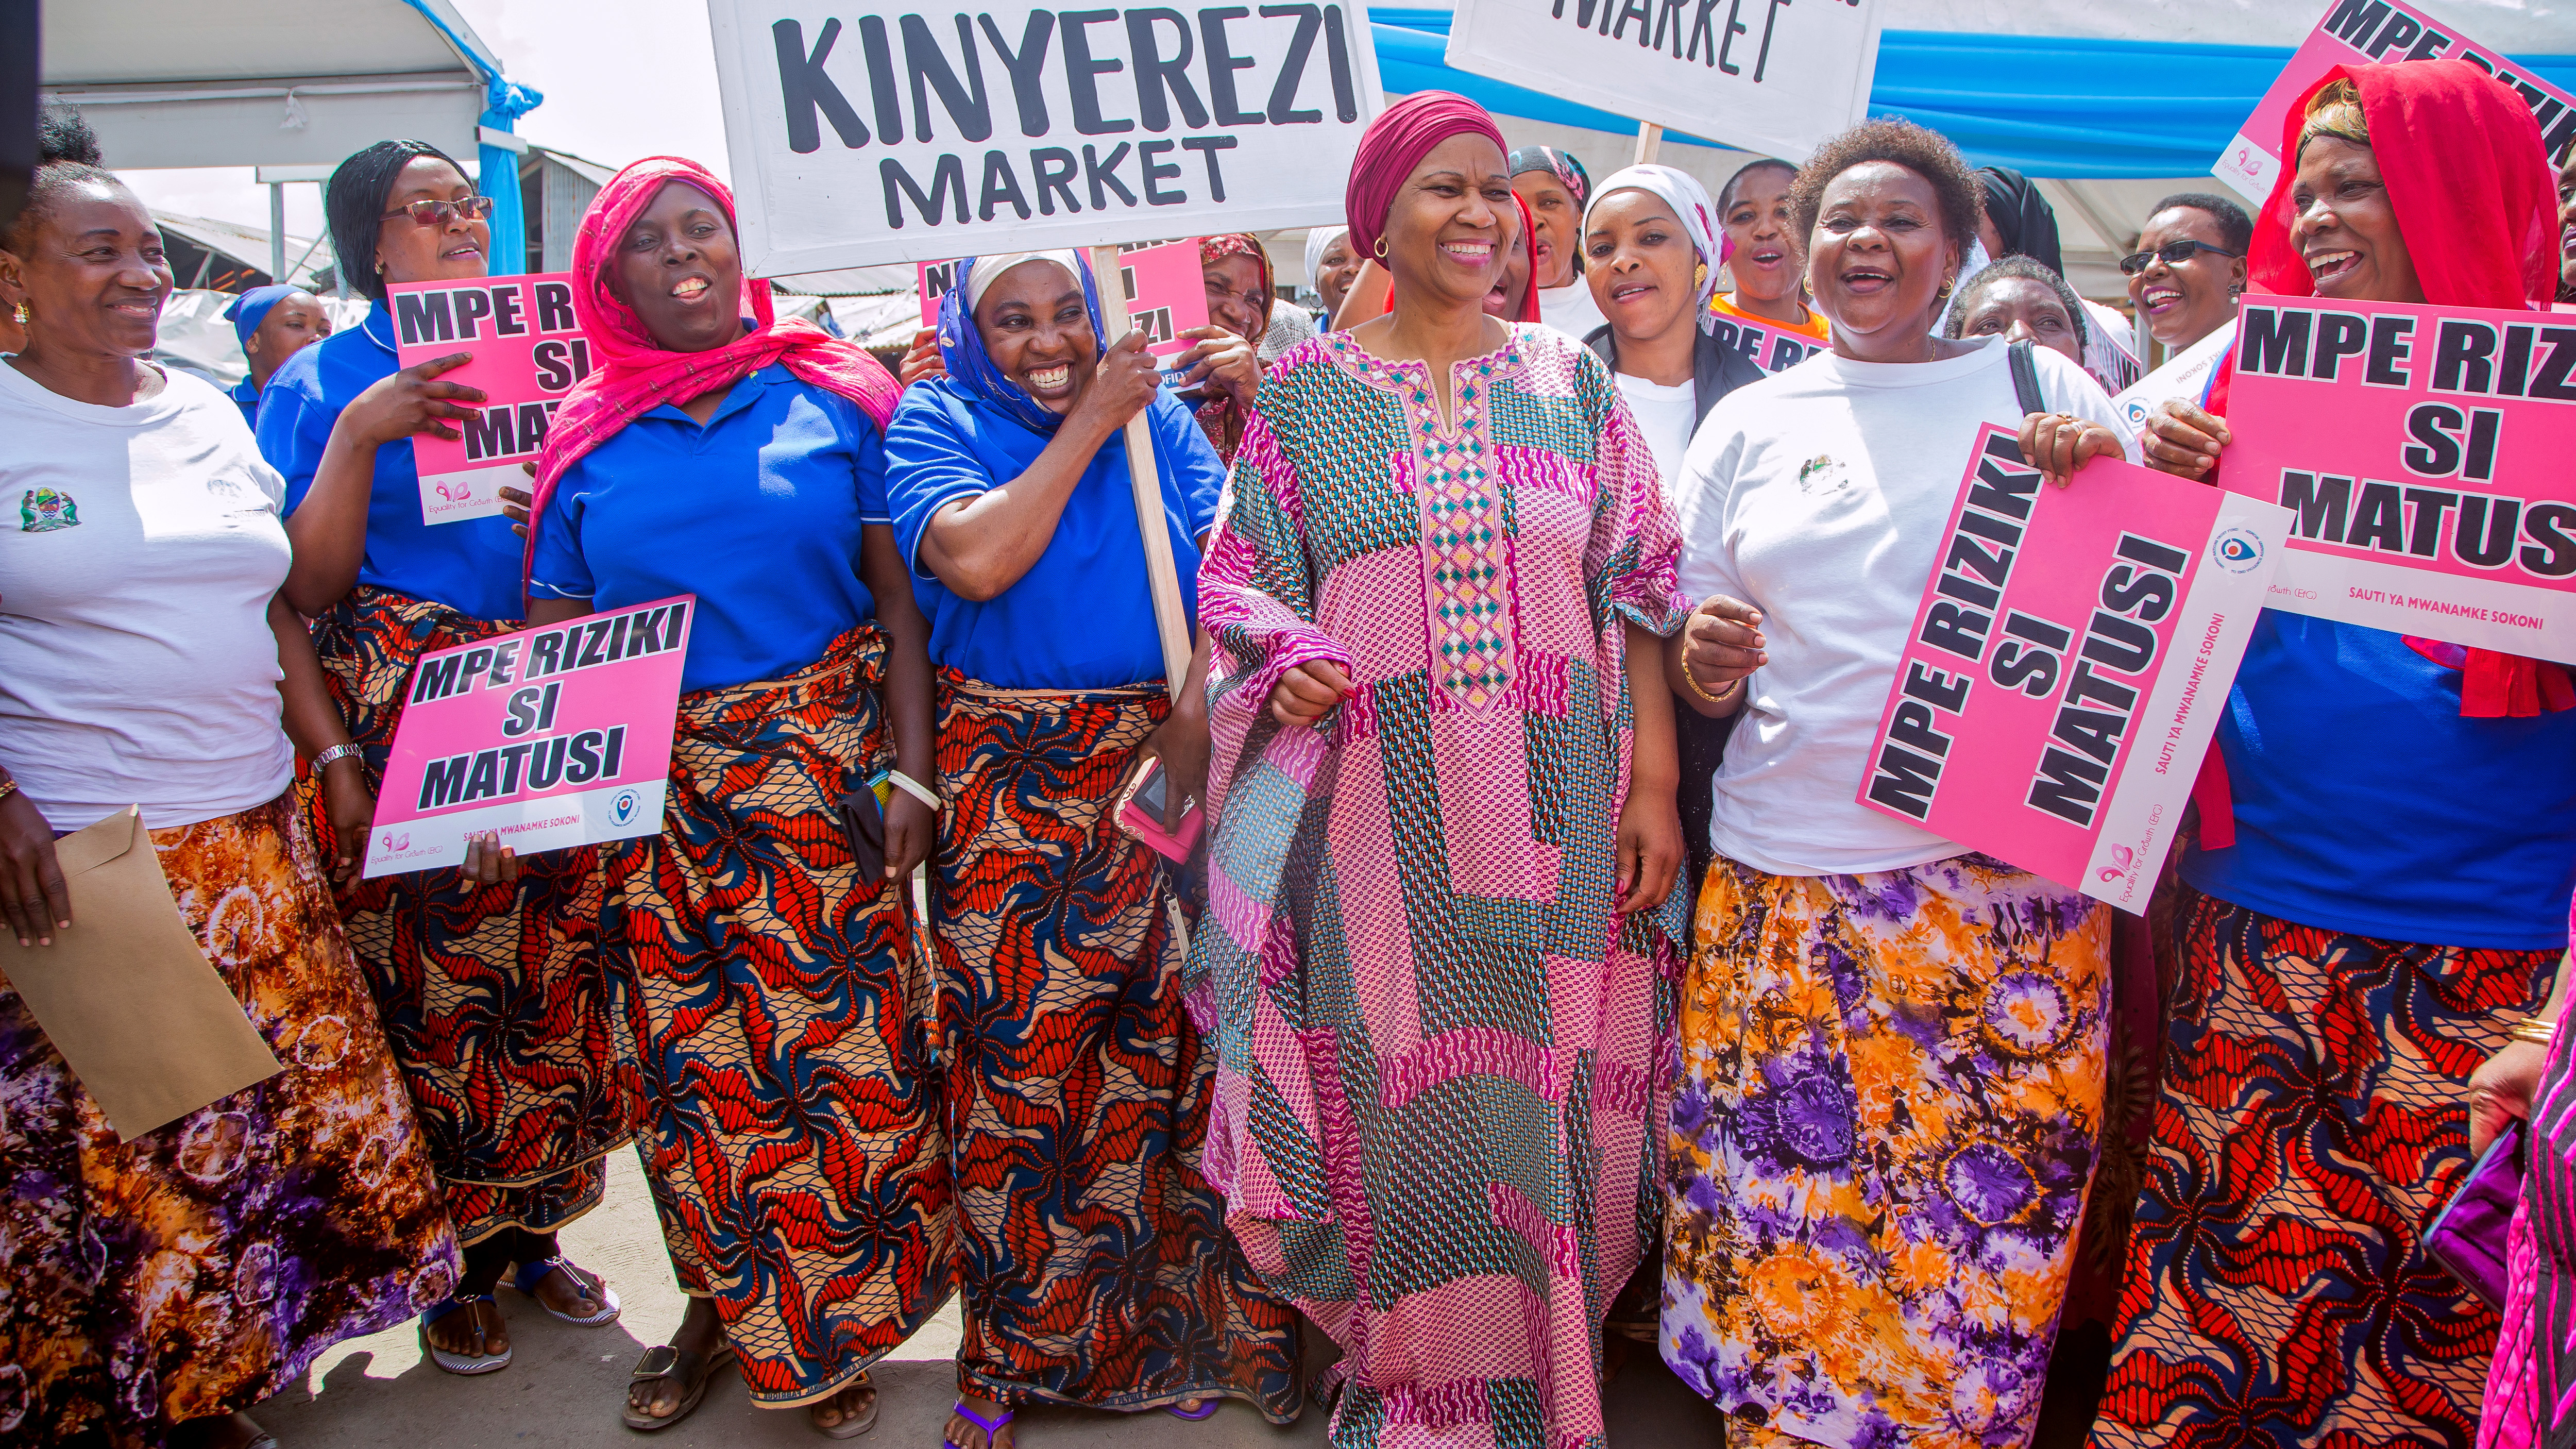 Phumzile dressed in bright traditional African clothes is surrounded by African women holding up signs.